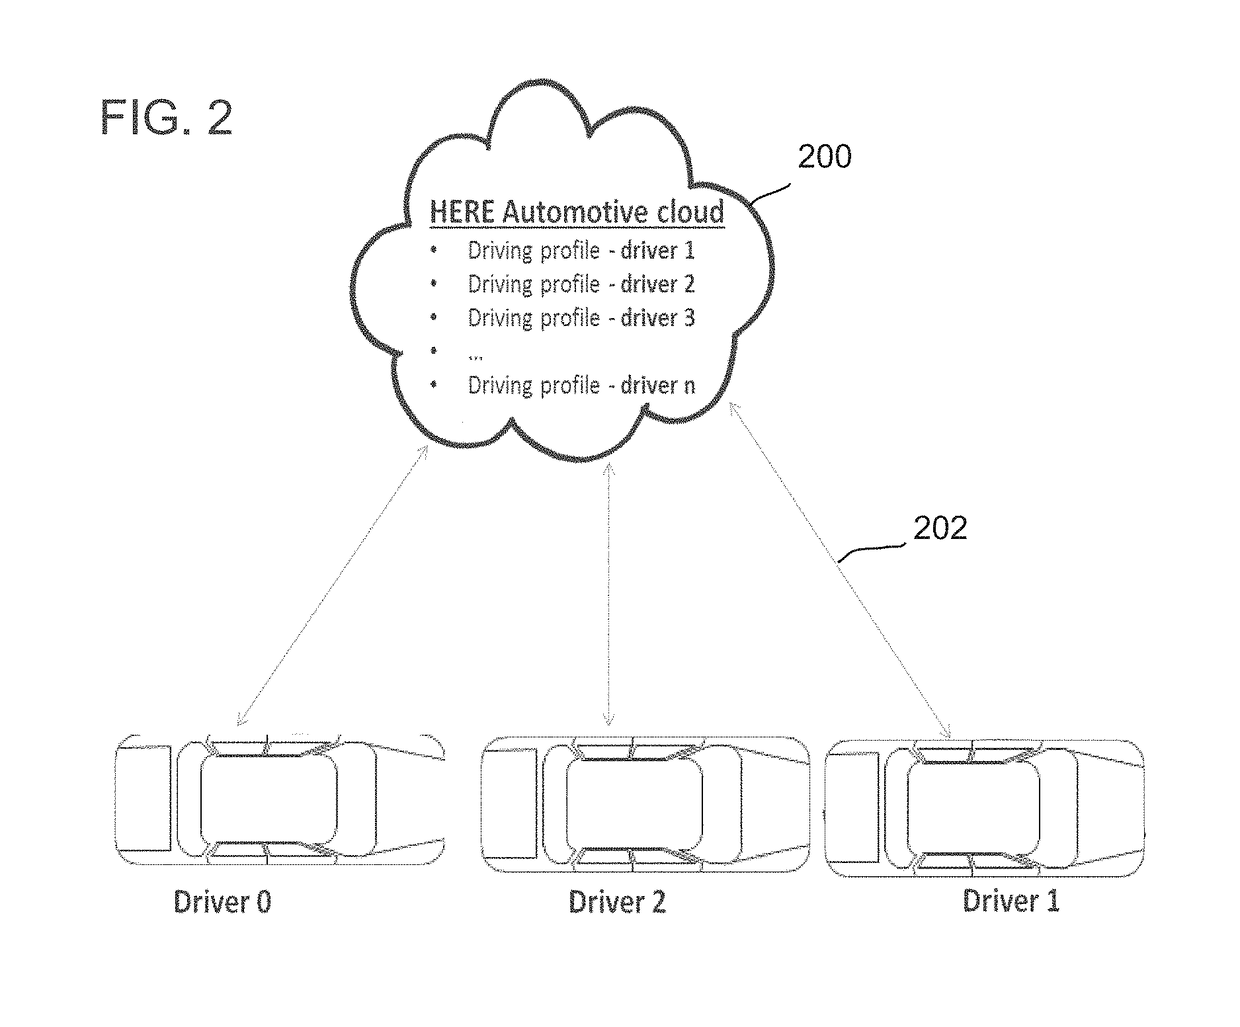 Personalized driving of autonomously driven vehicles